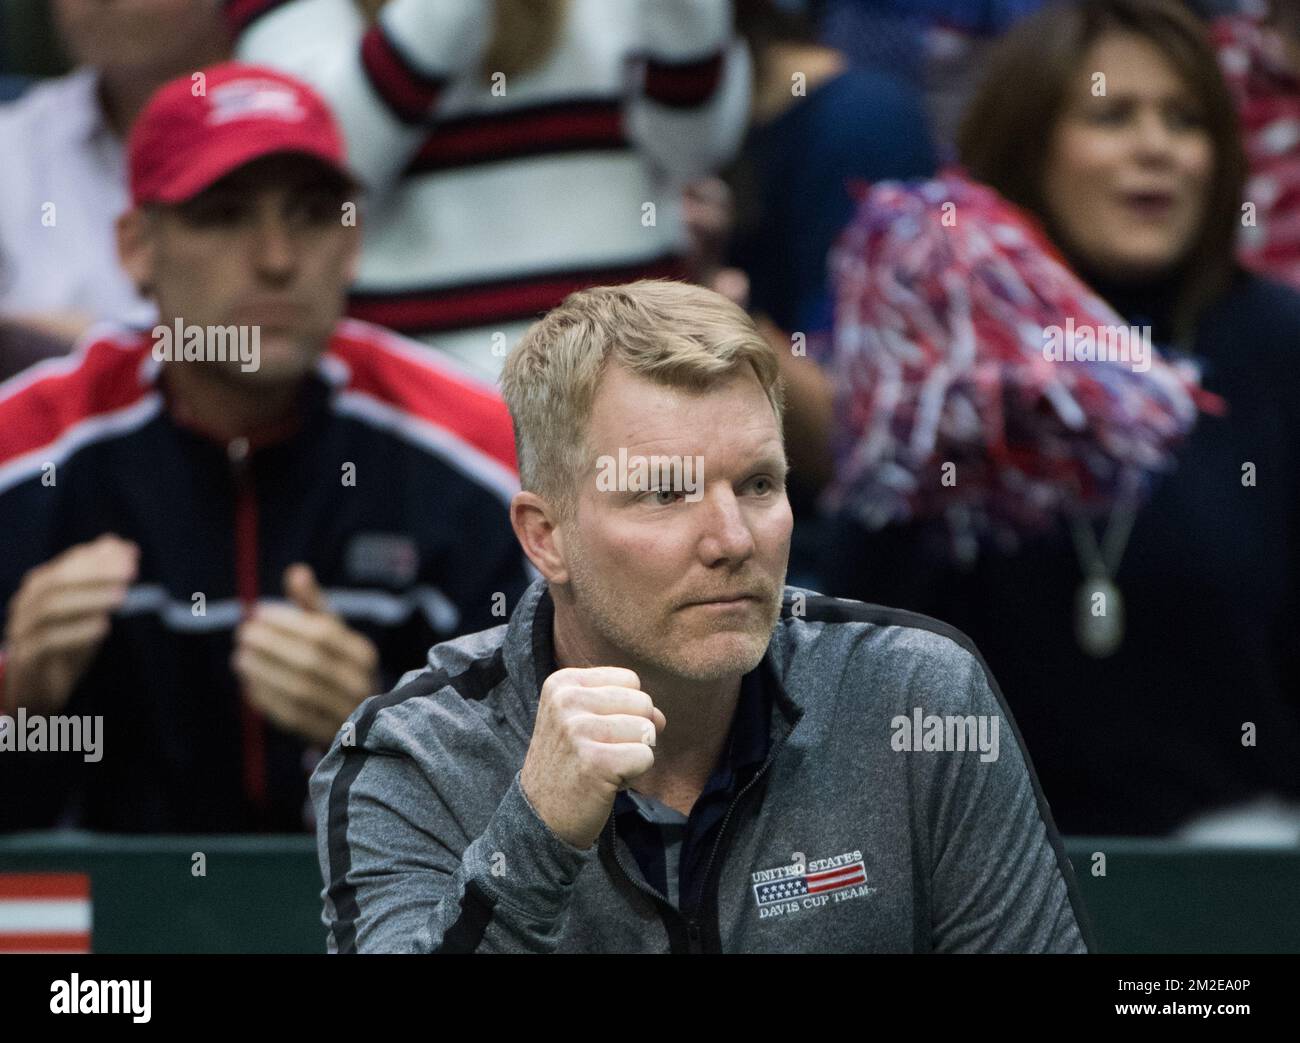 US team captain Jim Courier celebrates after winning a doubles tennis game between US' Ryan Harrison and Jack Sock versus Belgians Sander Gille and Joran Vliegen, the third rubber of the quarterfinals of the Davis Cup World Group tennis between USA and Belgium, Saturday 07 April 2018, in Nashville, United States of America. The Davis Cup meeting is taking place from 6 to 8 April. BELGA PHOTO BENOIT DOPPAGNE BELGA PHOTO BENOIT DOPPAGNE Stock Photo